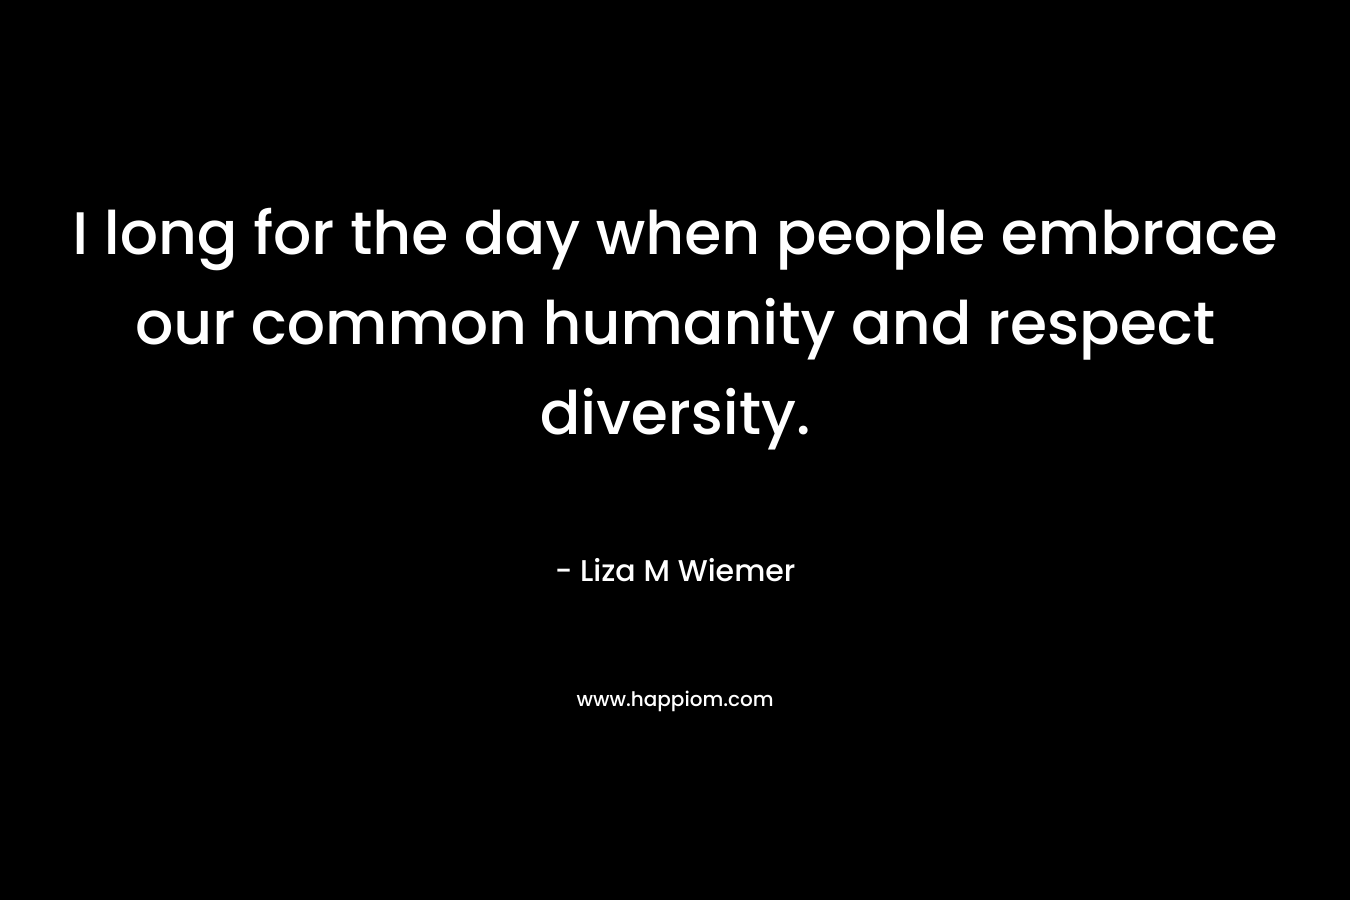 I long for the day when people embrace our common humanity and respect diversity. – Liza M Wiemer